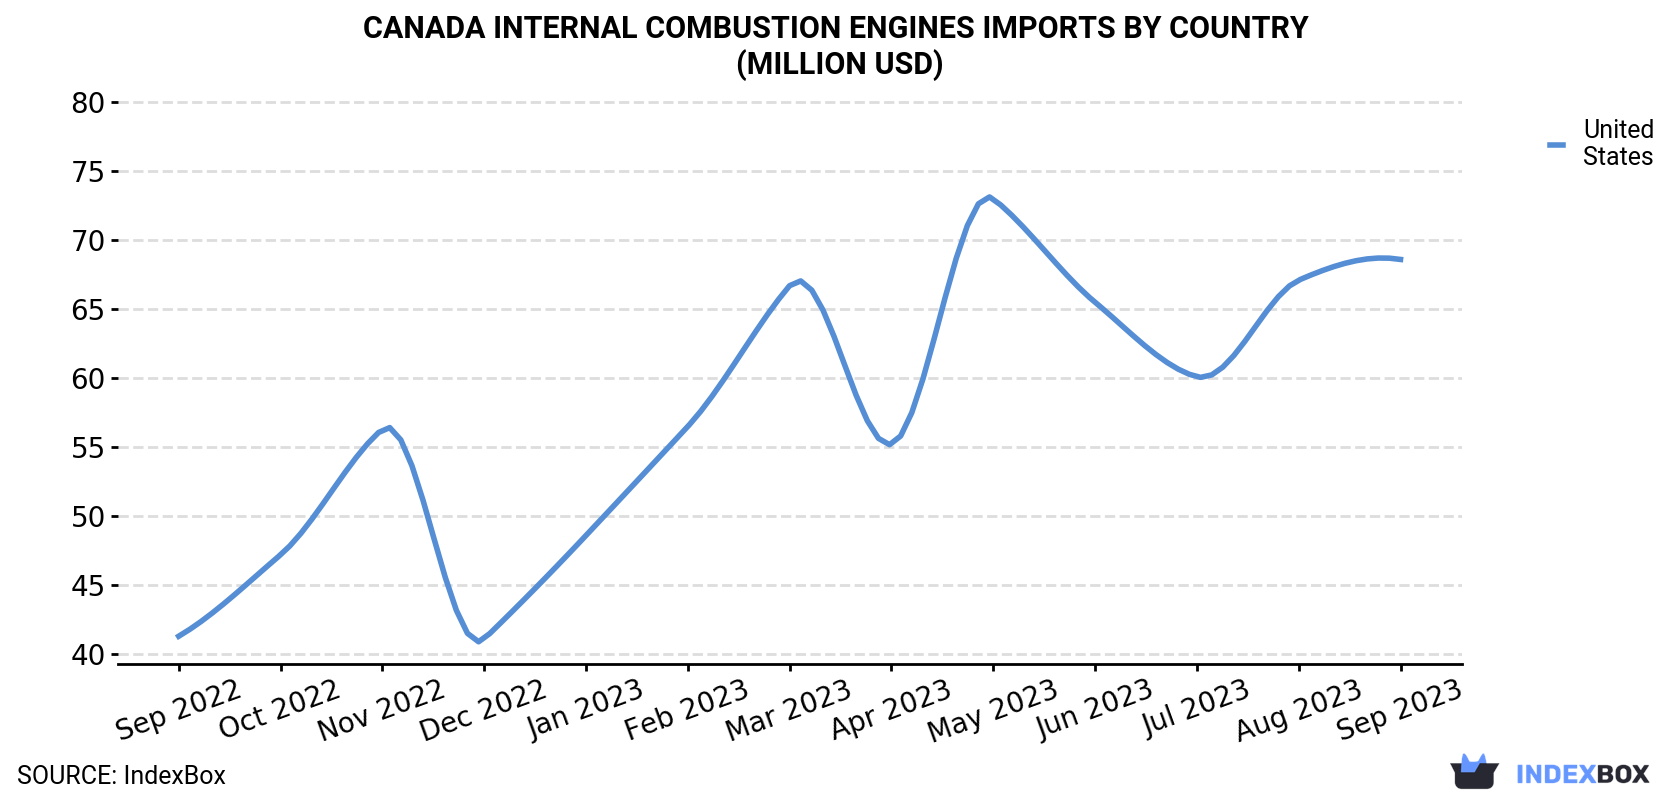 Canada Internal Combustion Engines Imports By Country (Million USD)